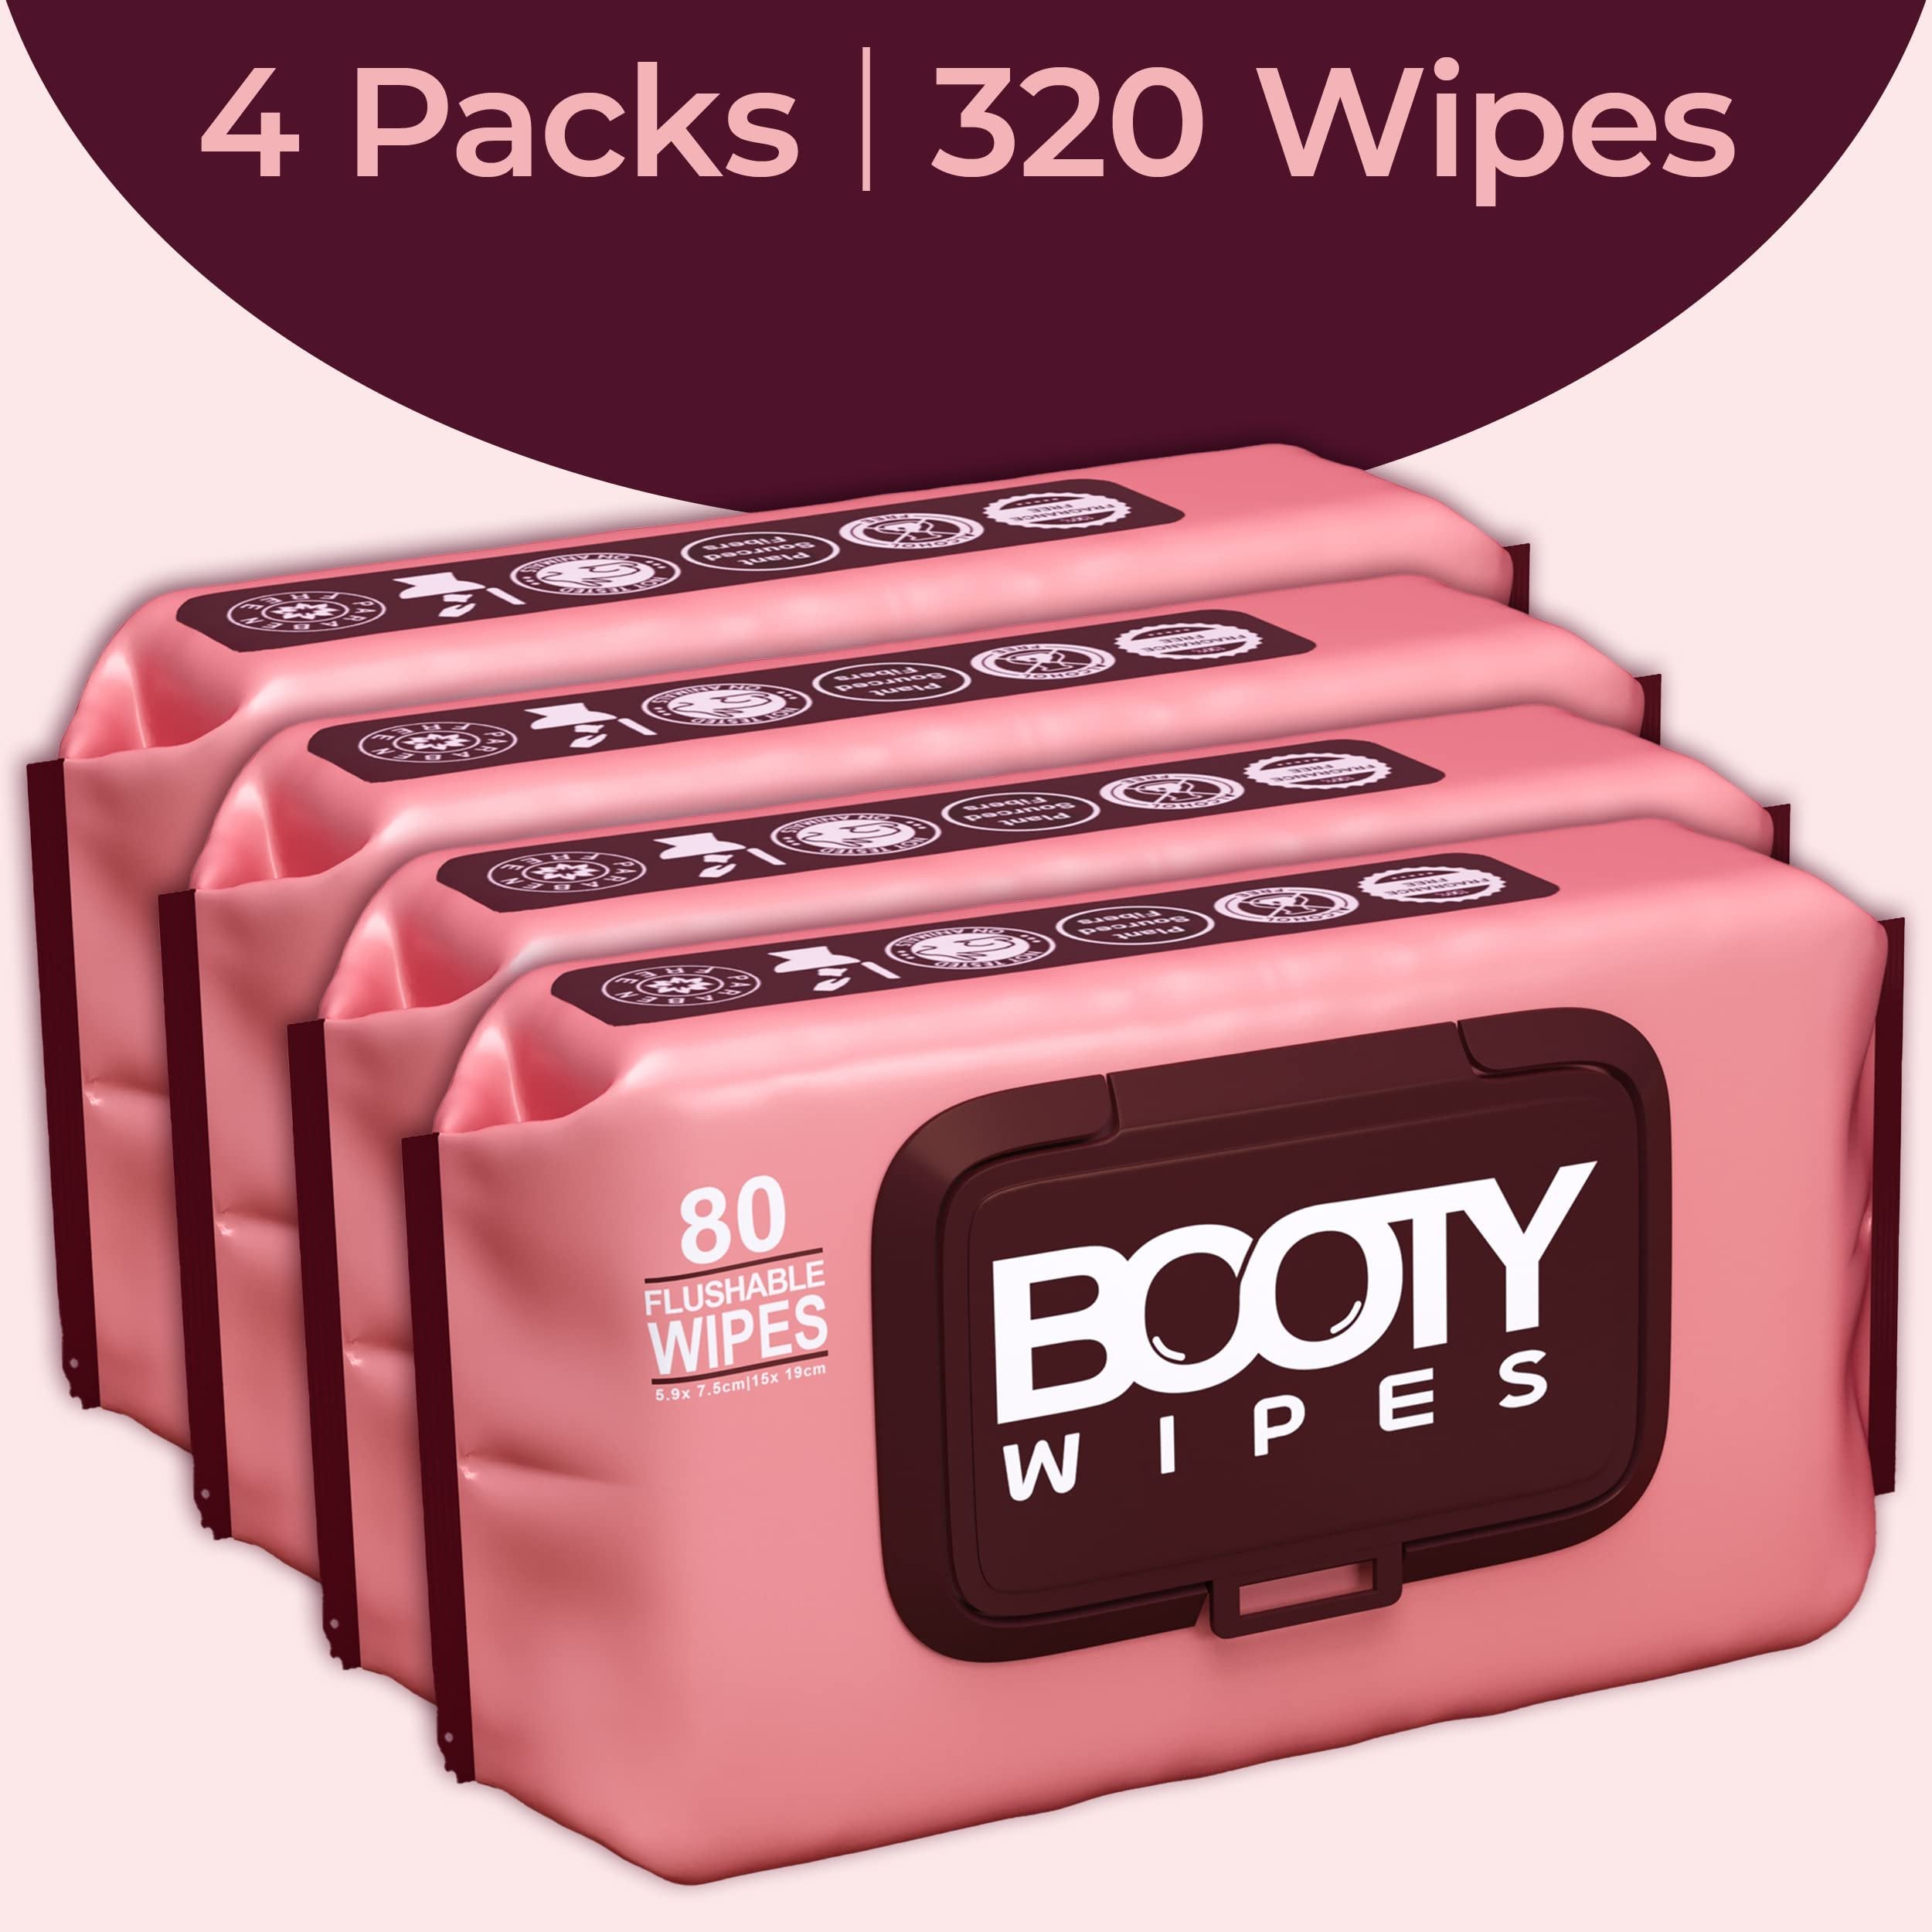 BOOTY WIPES - 80 Count (Pack of 4) Flushable Feminine Wet Wipes for Women | pH Balanced with Vitamin-E & Aloe | White